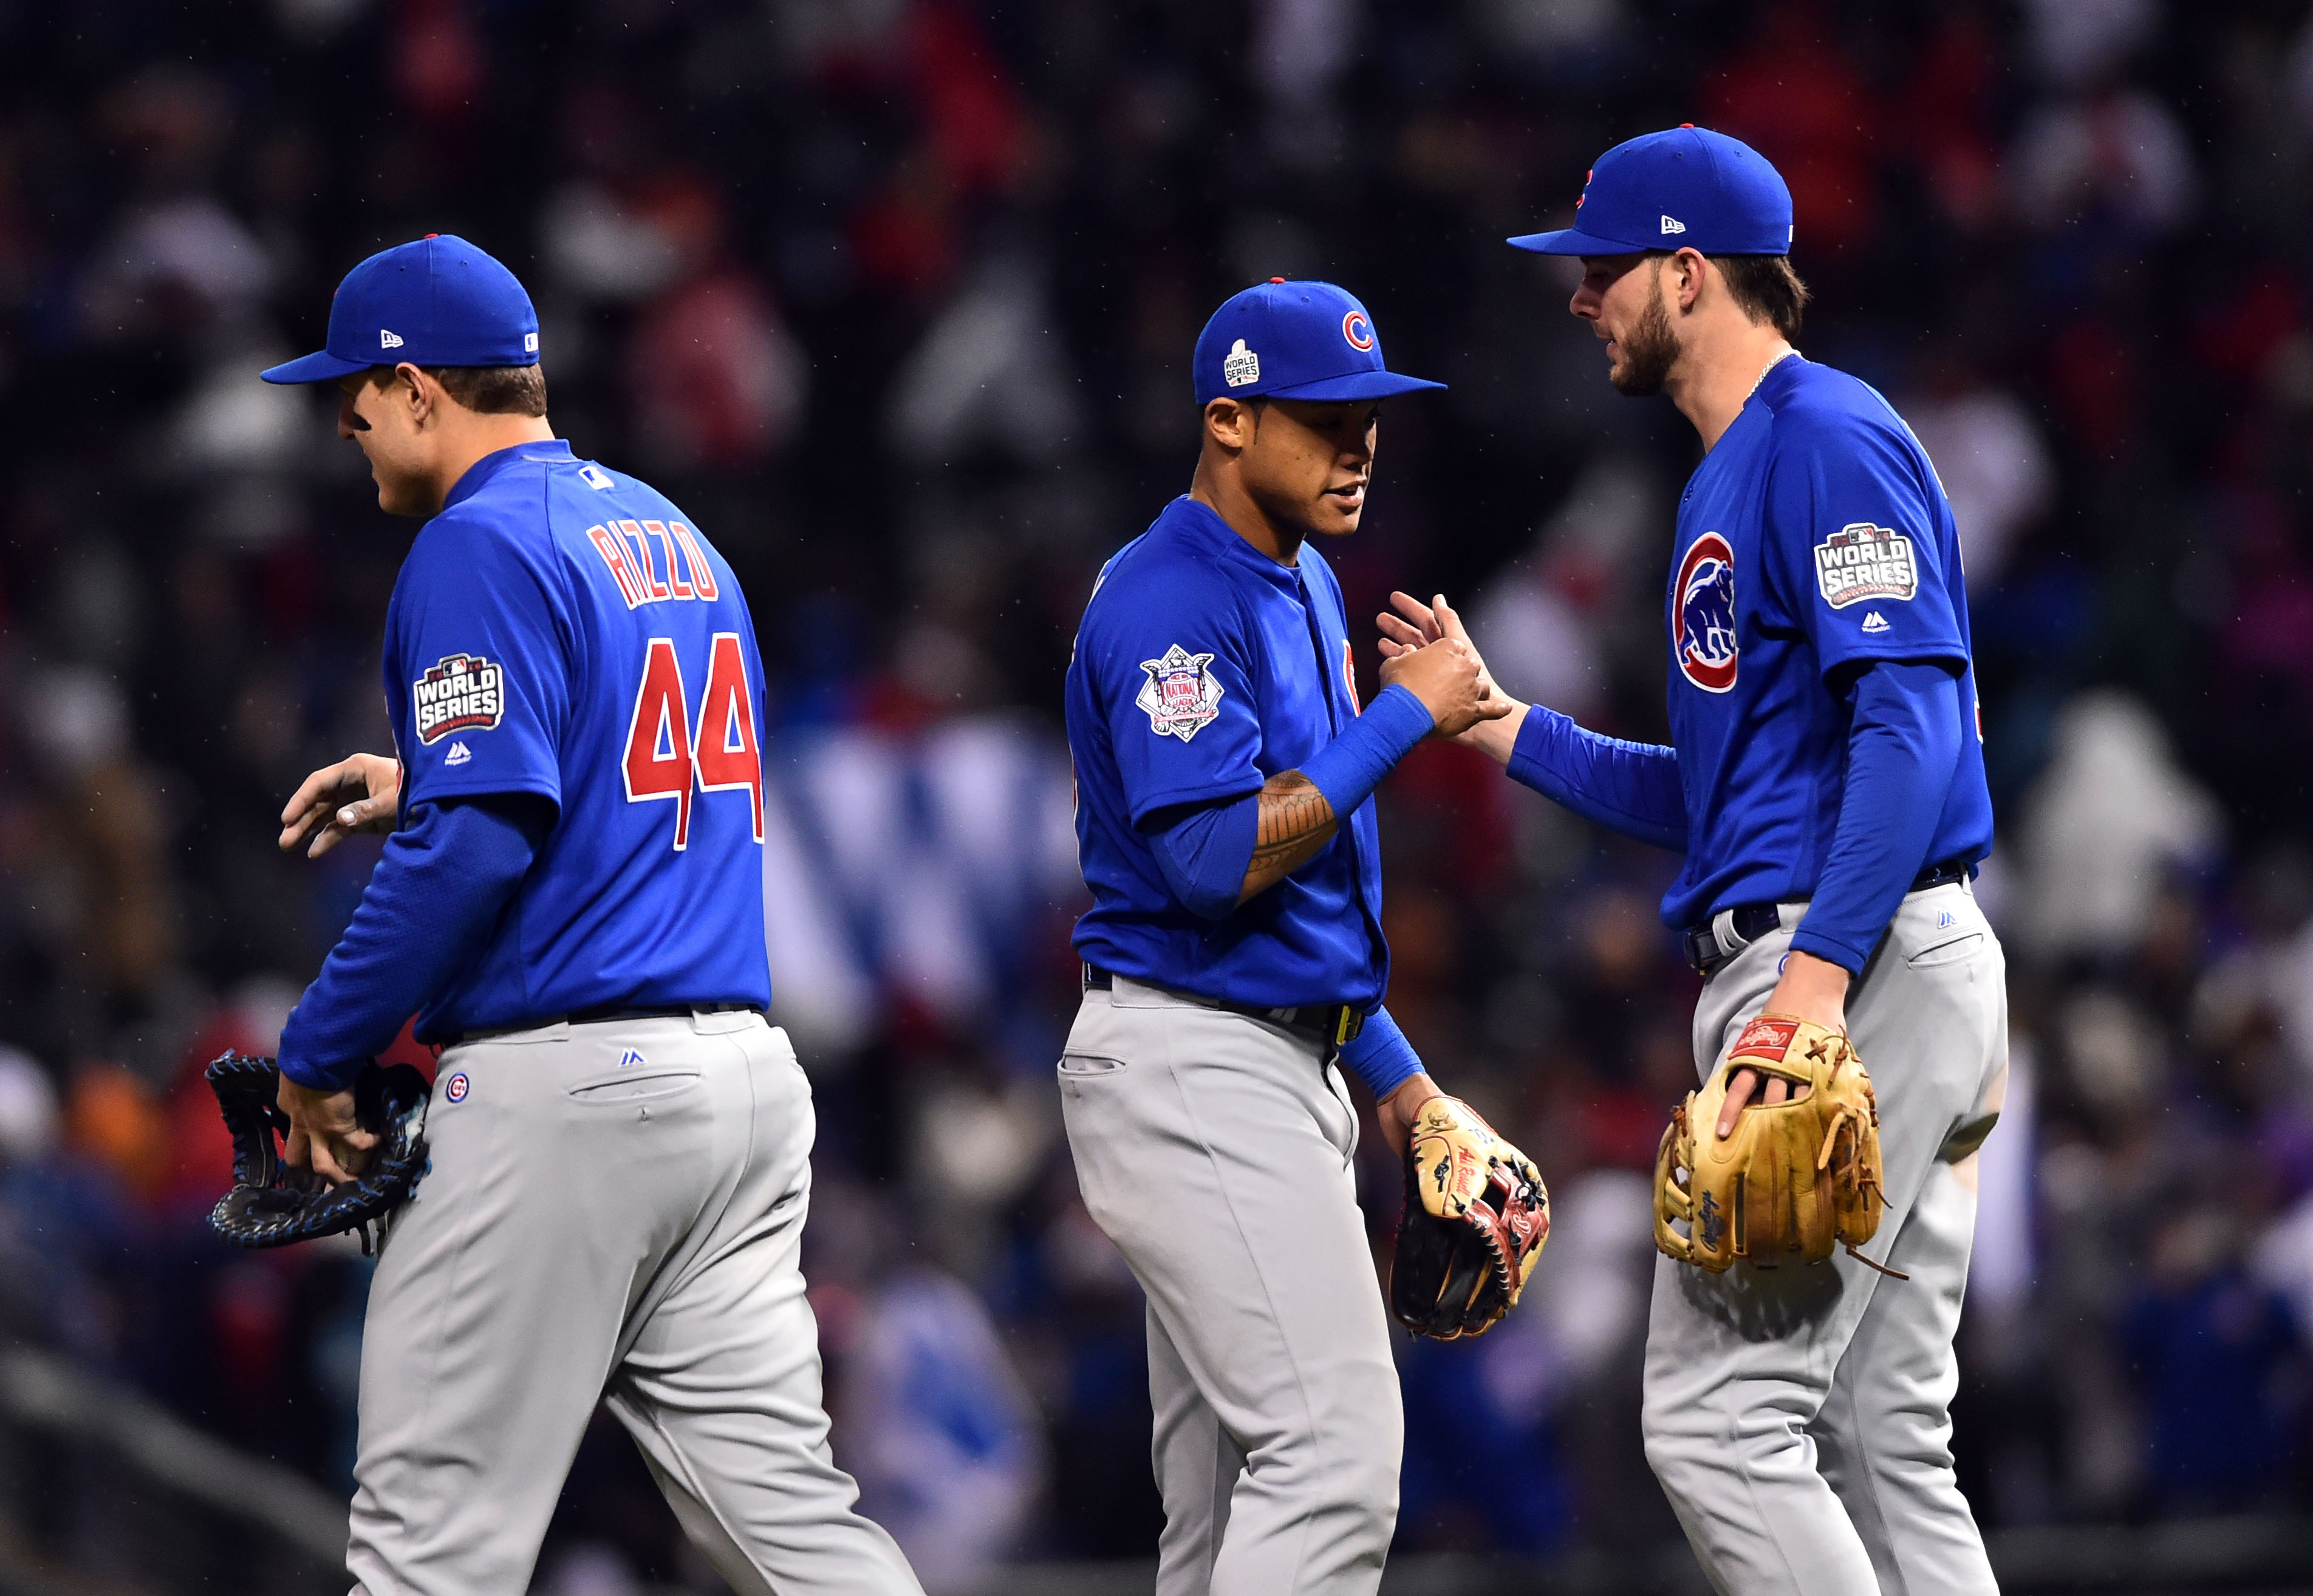 People 3808x2628 Major League Baseball Chicago Cubs Addison Russel Anthony Rizzo Kris Bryant men